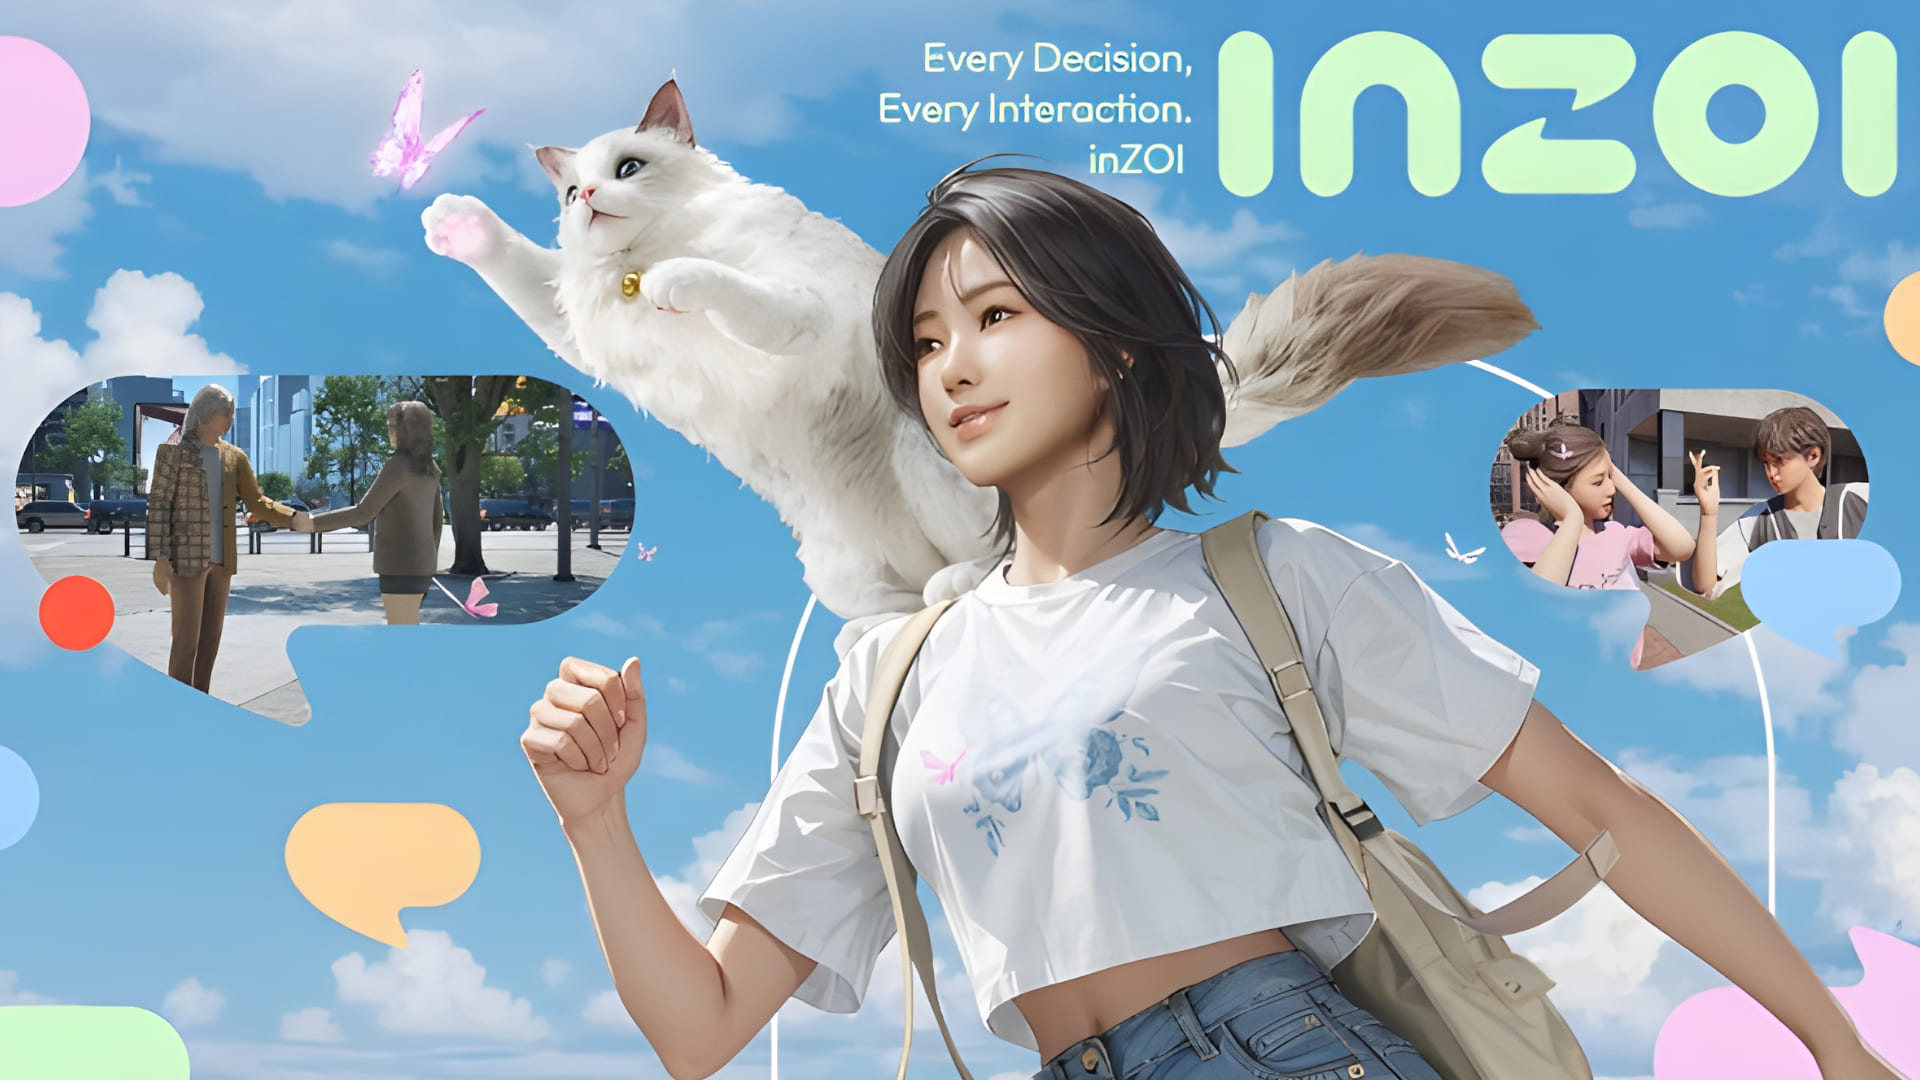 NEW Life Simulation Game: Rival to Sims, Life by You? (Inzoi) 